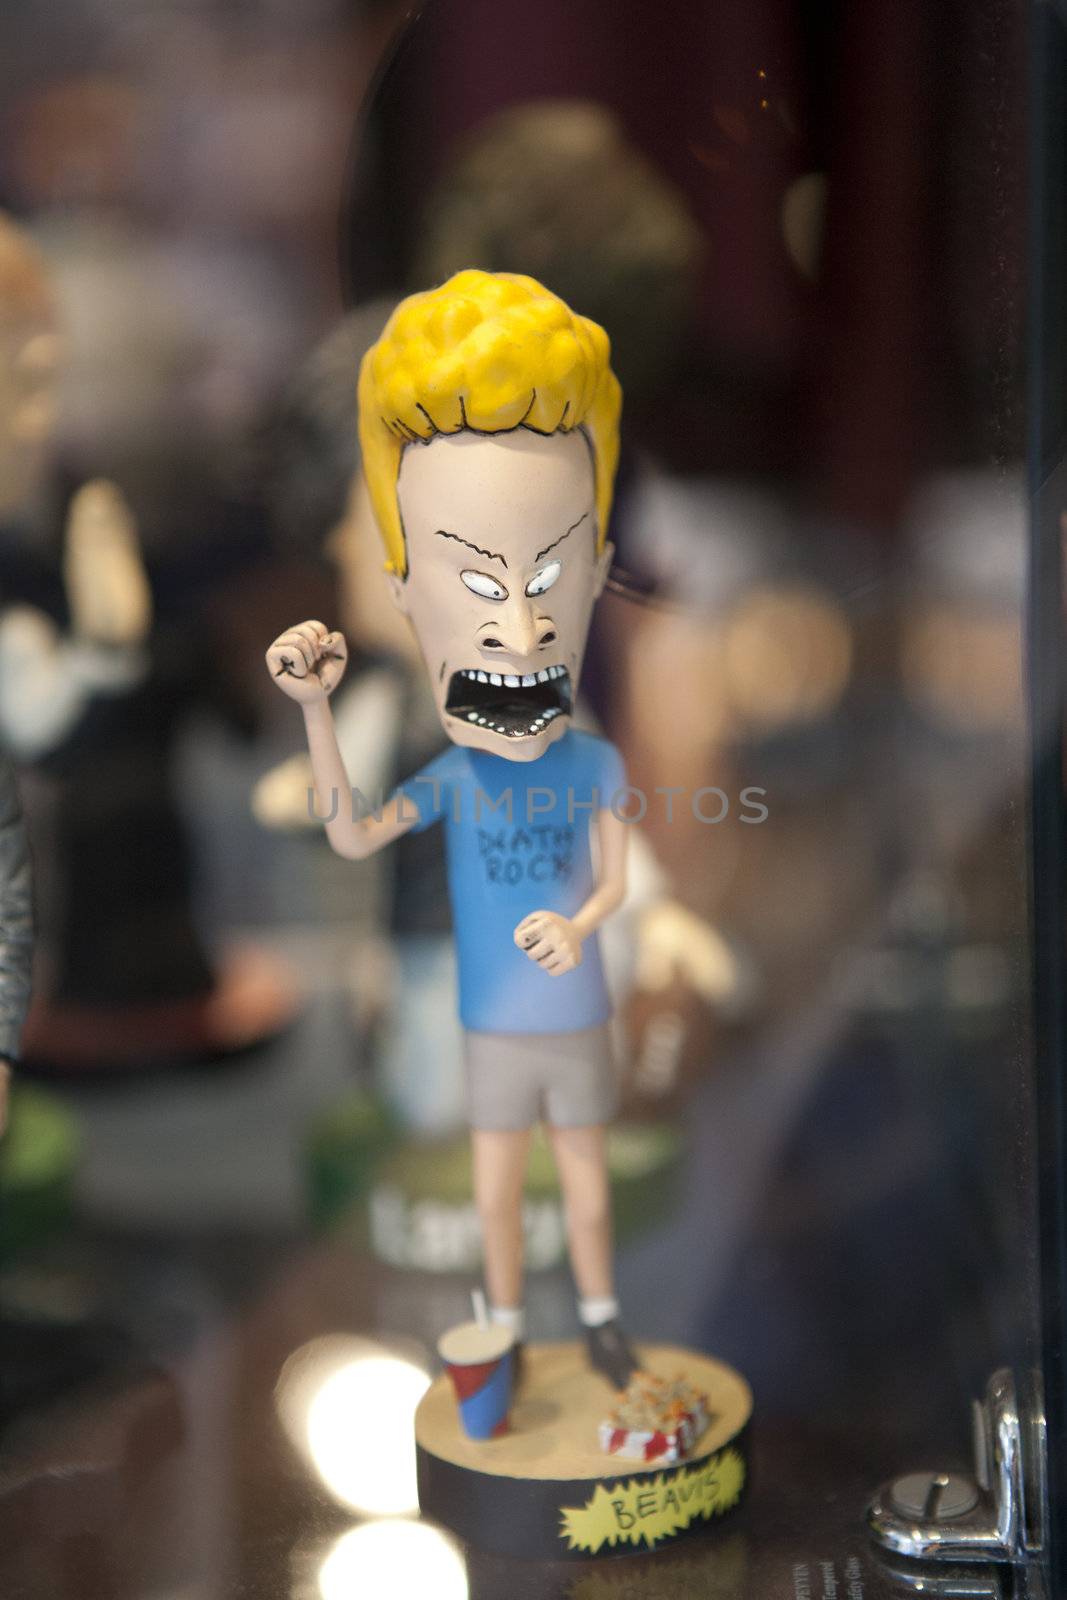 Beavis from "Beavis and Butthead" bobblehead character, behind glass.